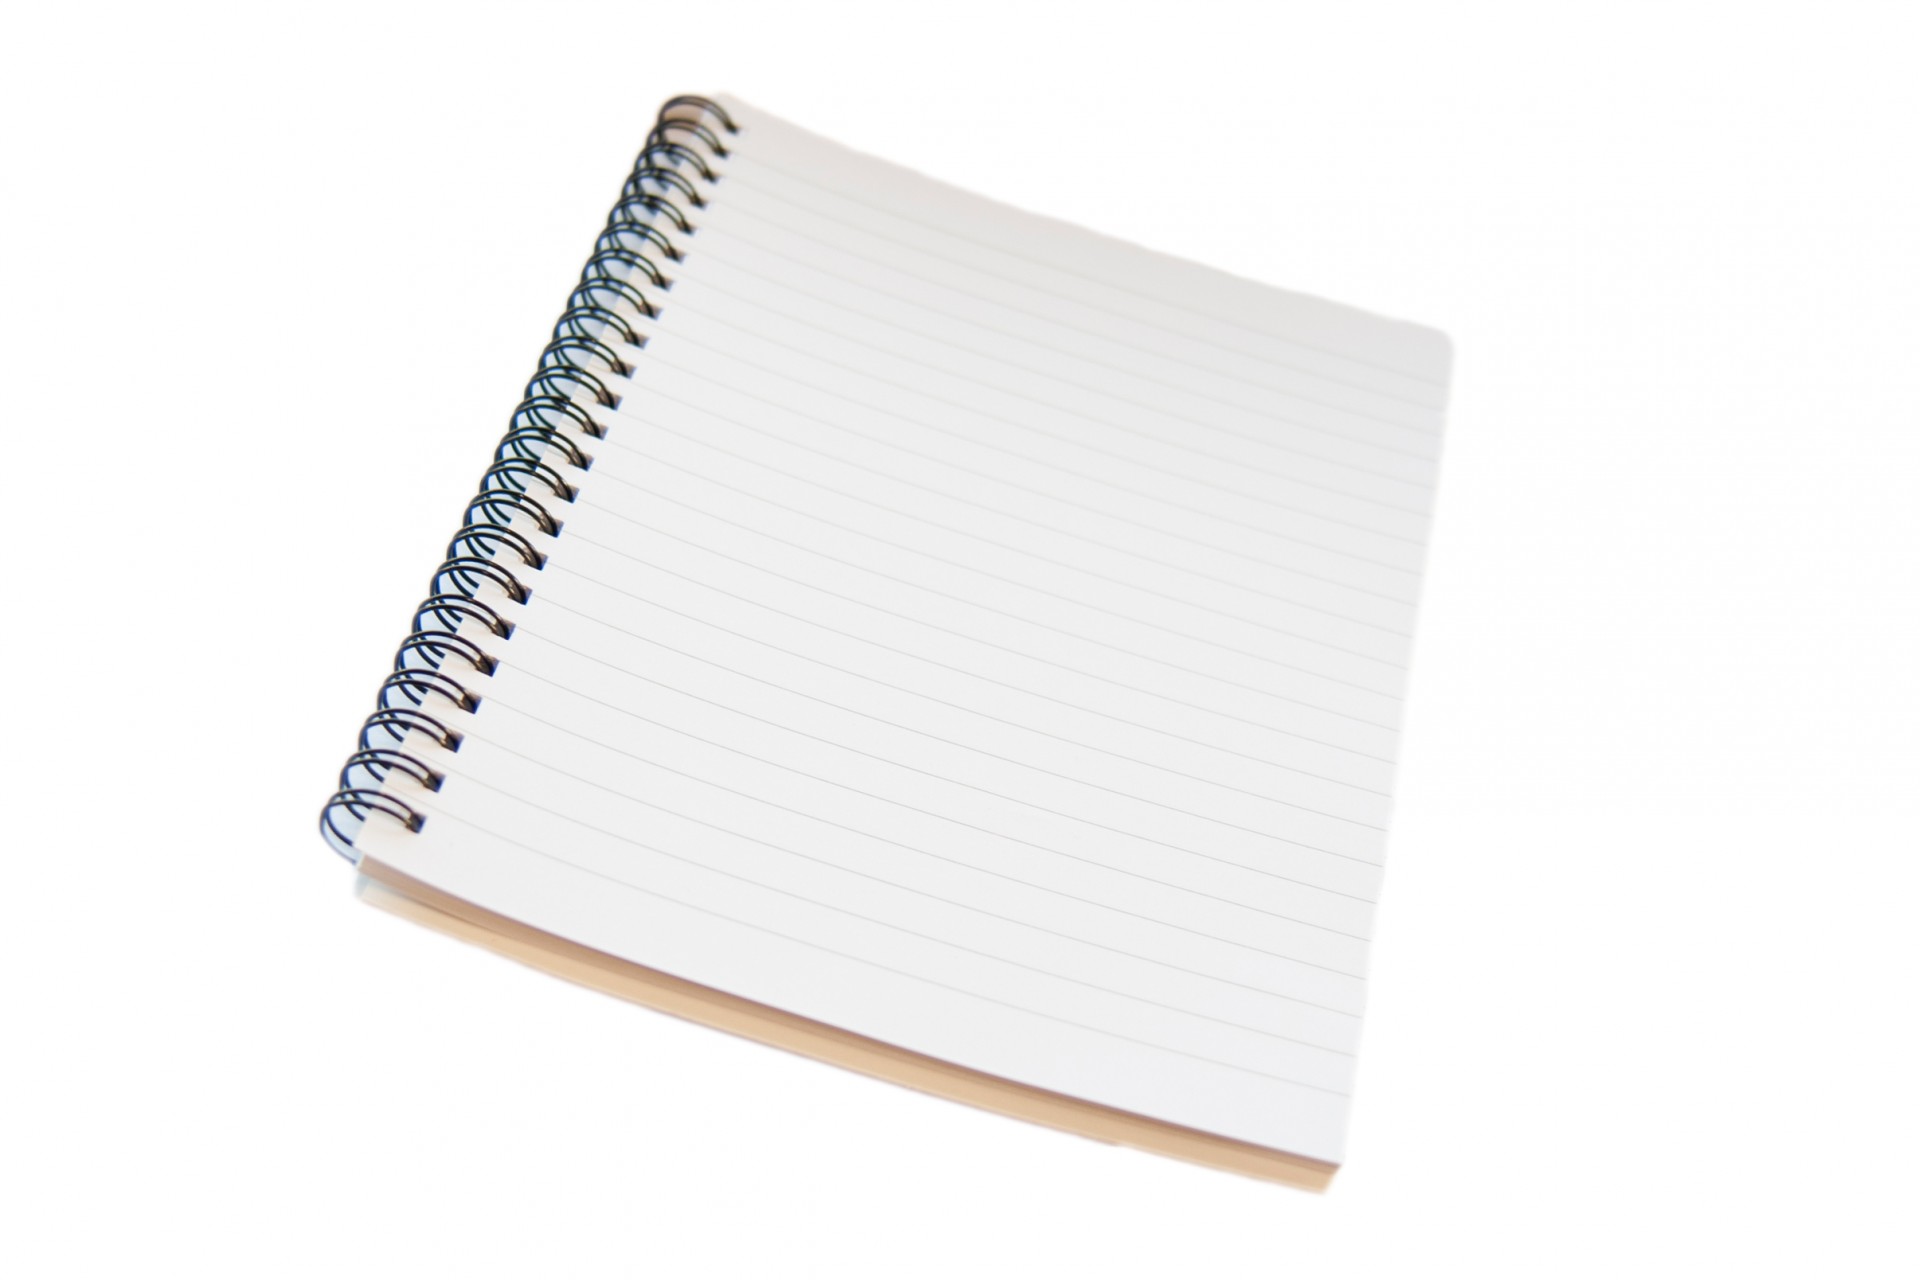 Spiral Notepad Isolated